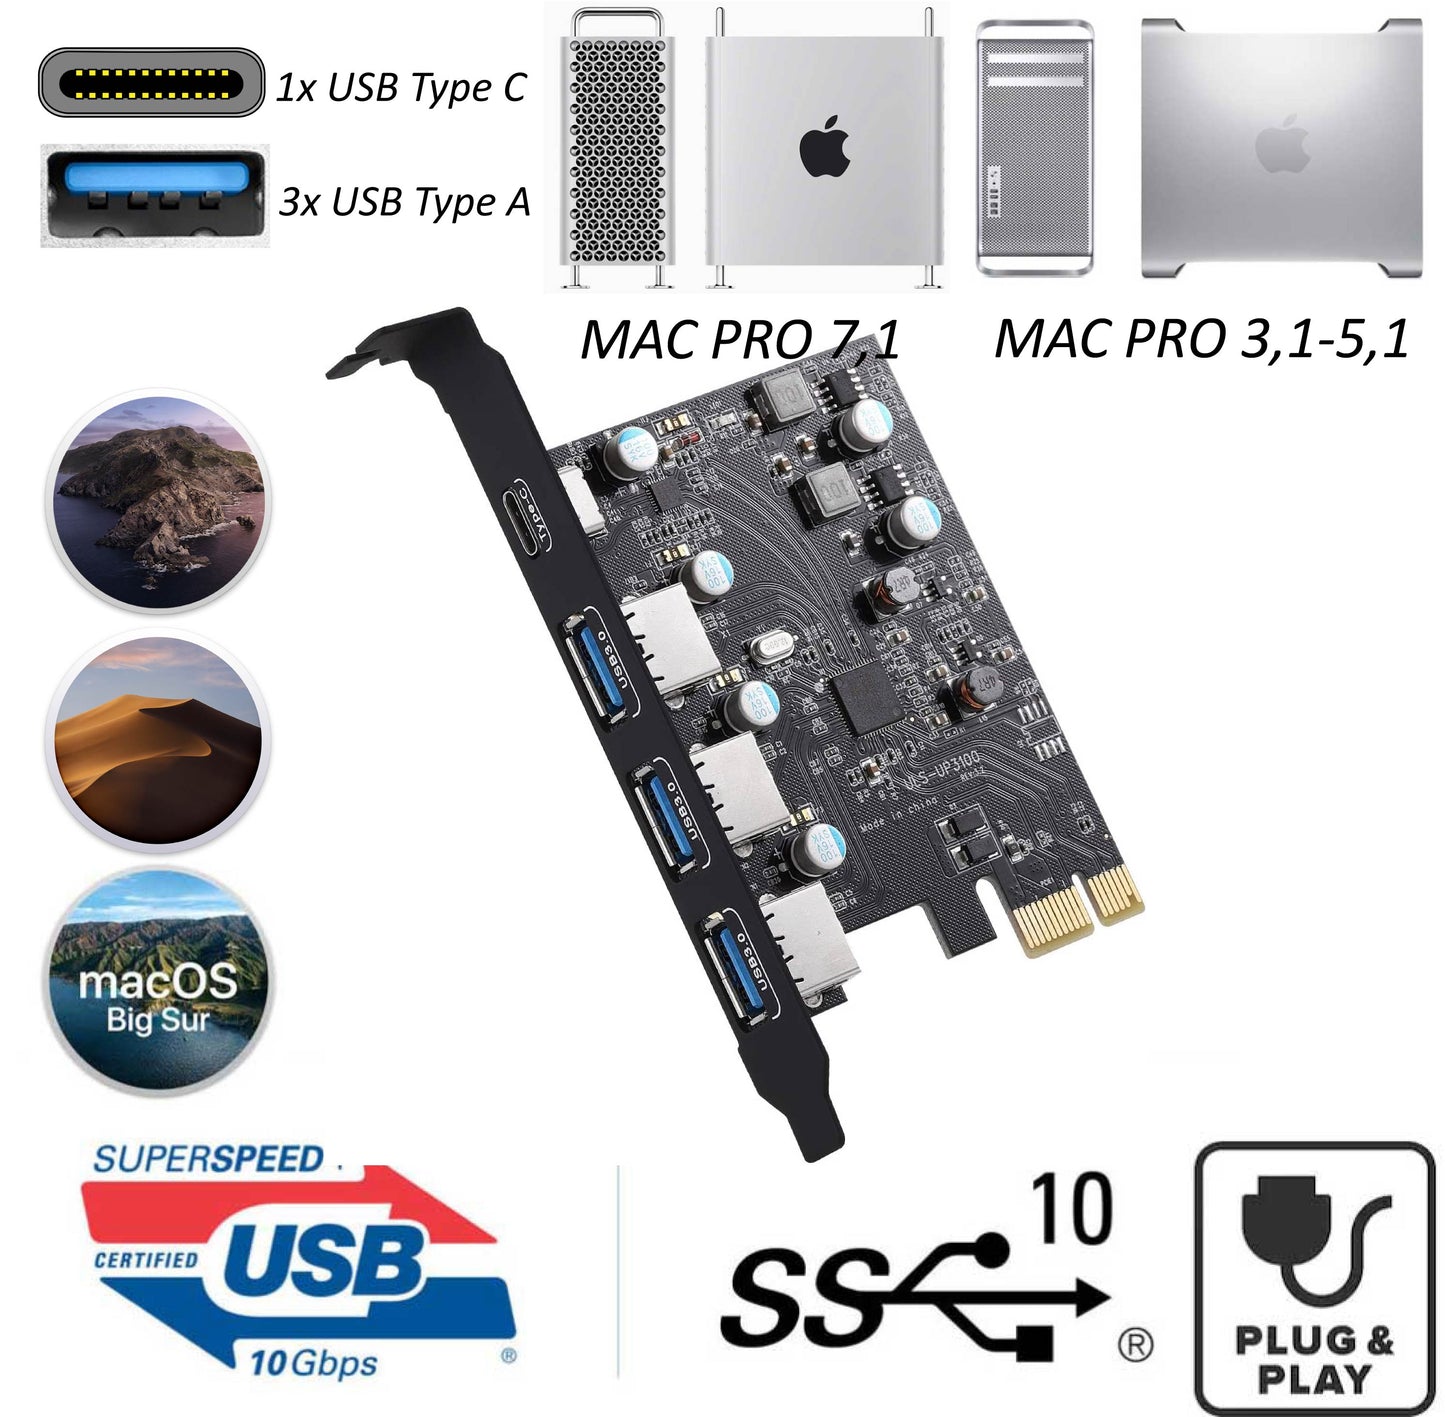 USB 3.1 Type-A & Type C MAC PRO PCIe Card - Plug and Play!! Supports 3,1 4,1 5,1